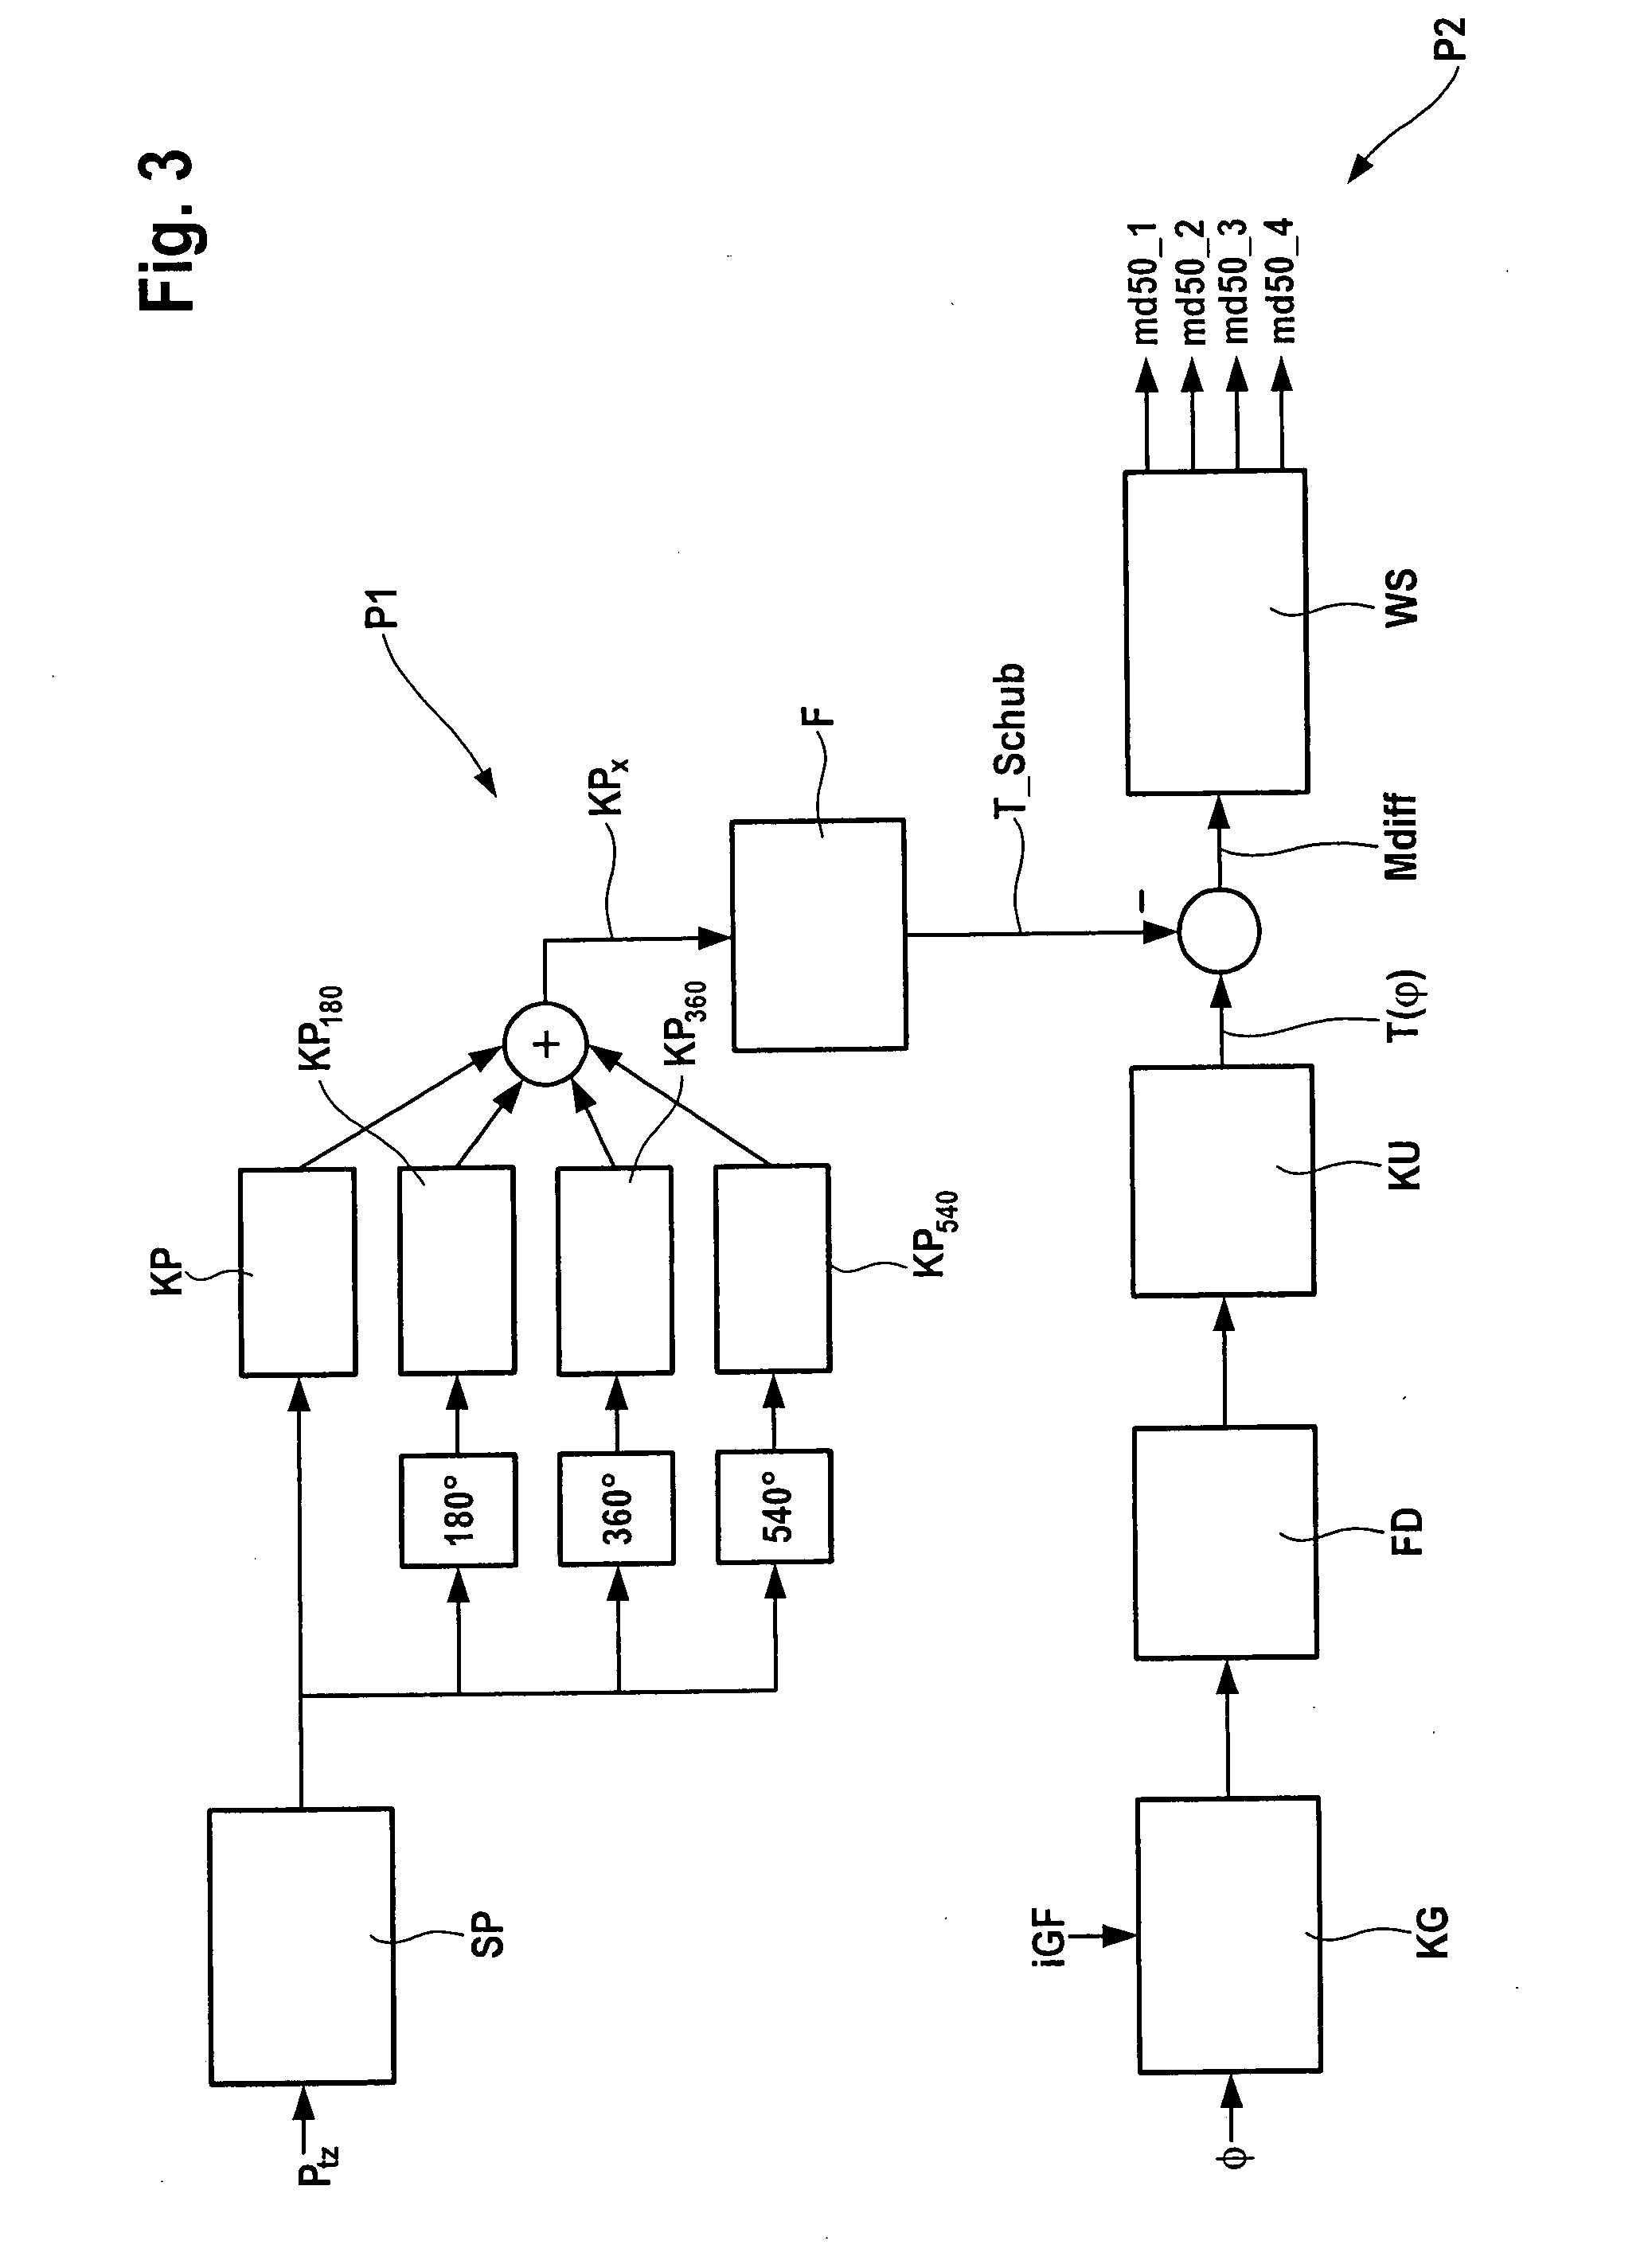 Method for determining cylinder-specific combustion features of an internal combustion engine